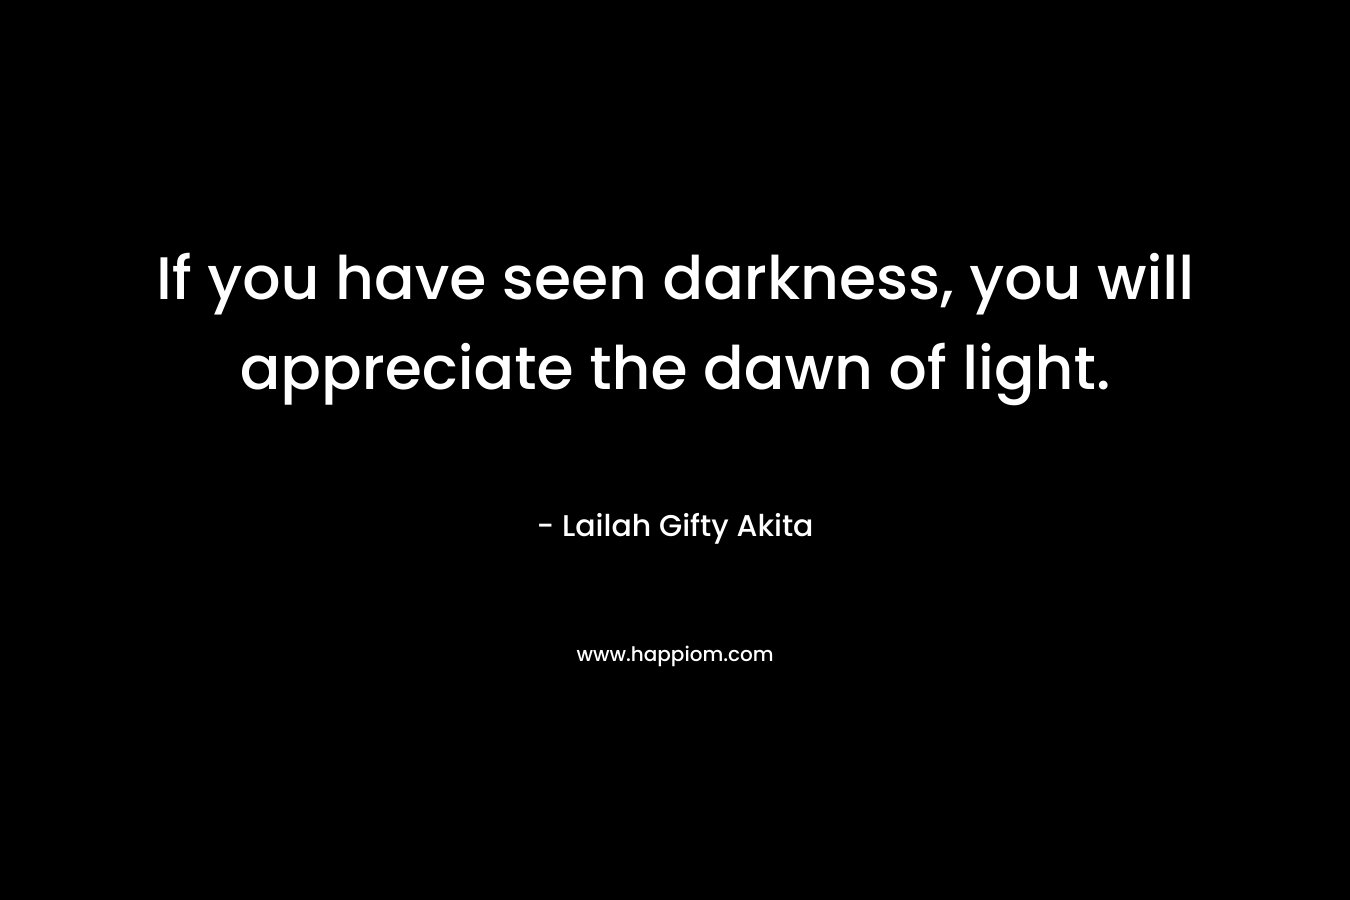 If you have seen darkness, you will appreciate the dawn of light.